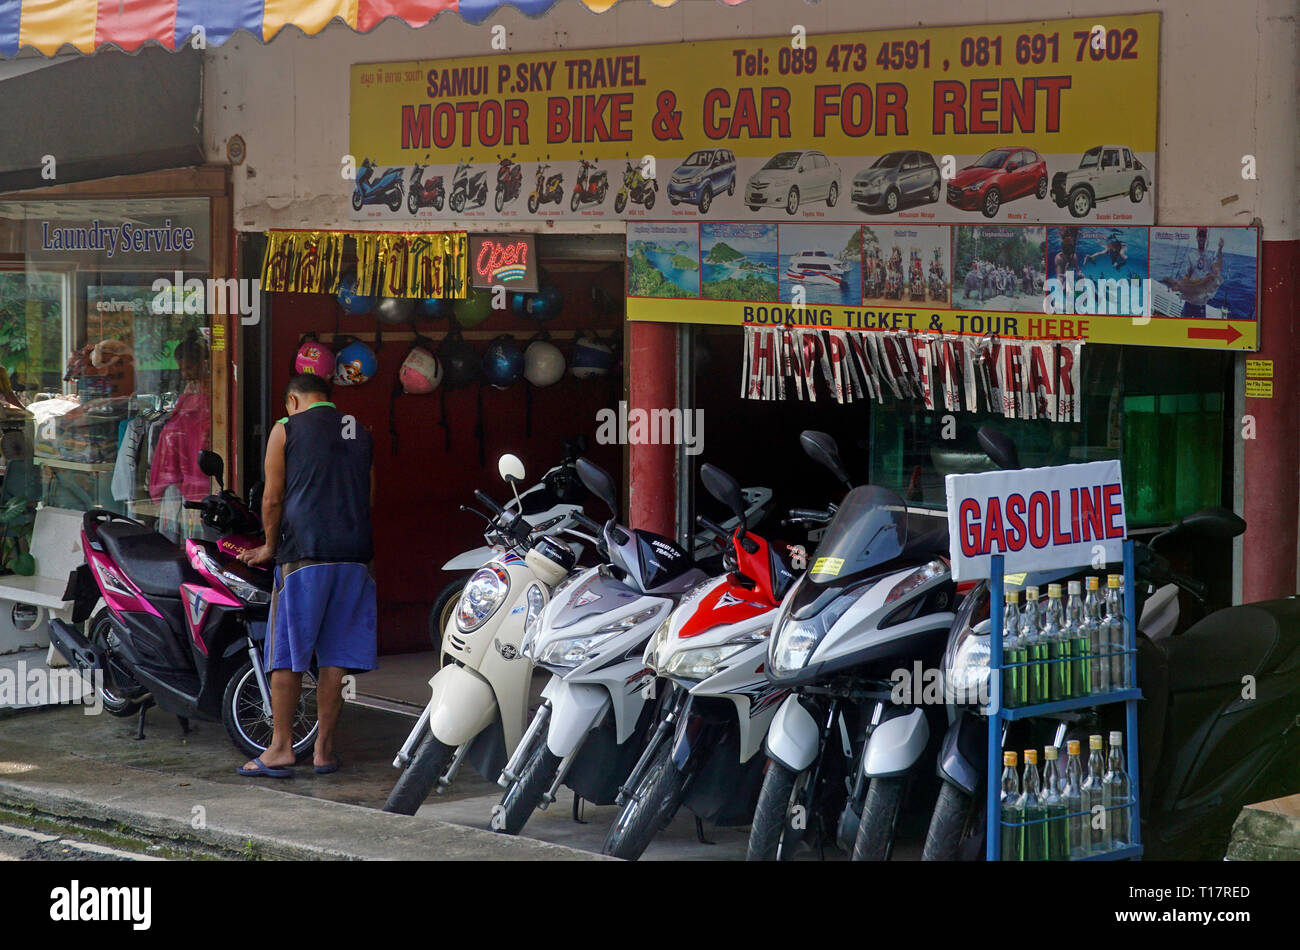 Scooter rental and gas in bottles at Lamai center, Koh Samui, Surat Thani, Gulf of Thailand, Thailand Stock Photo